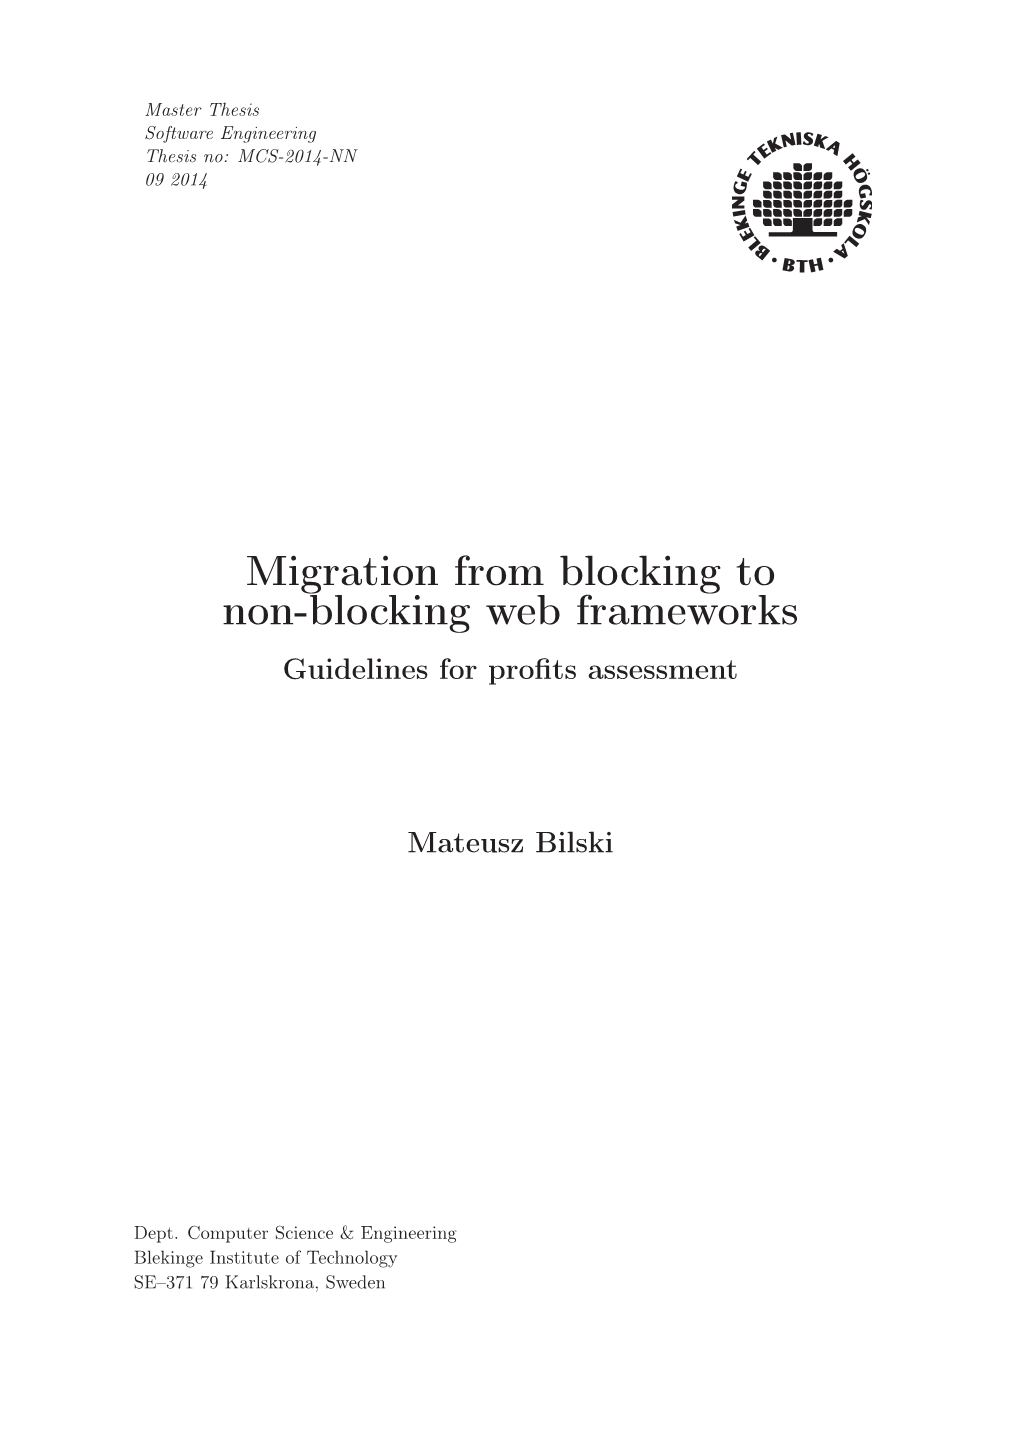 Migration from Blocking to Non-Blocking Web Frameworks Guidelines for Proﬁts Assessment